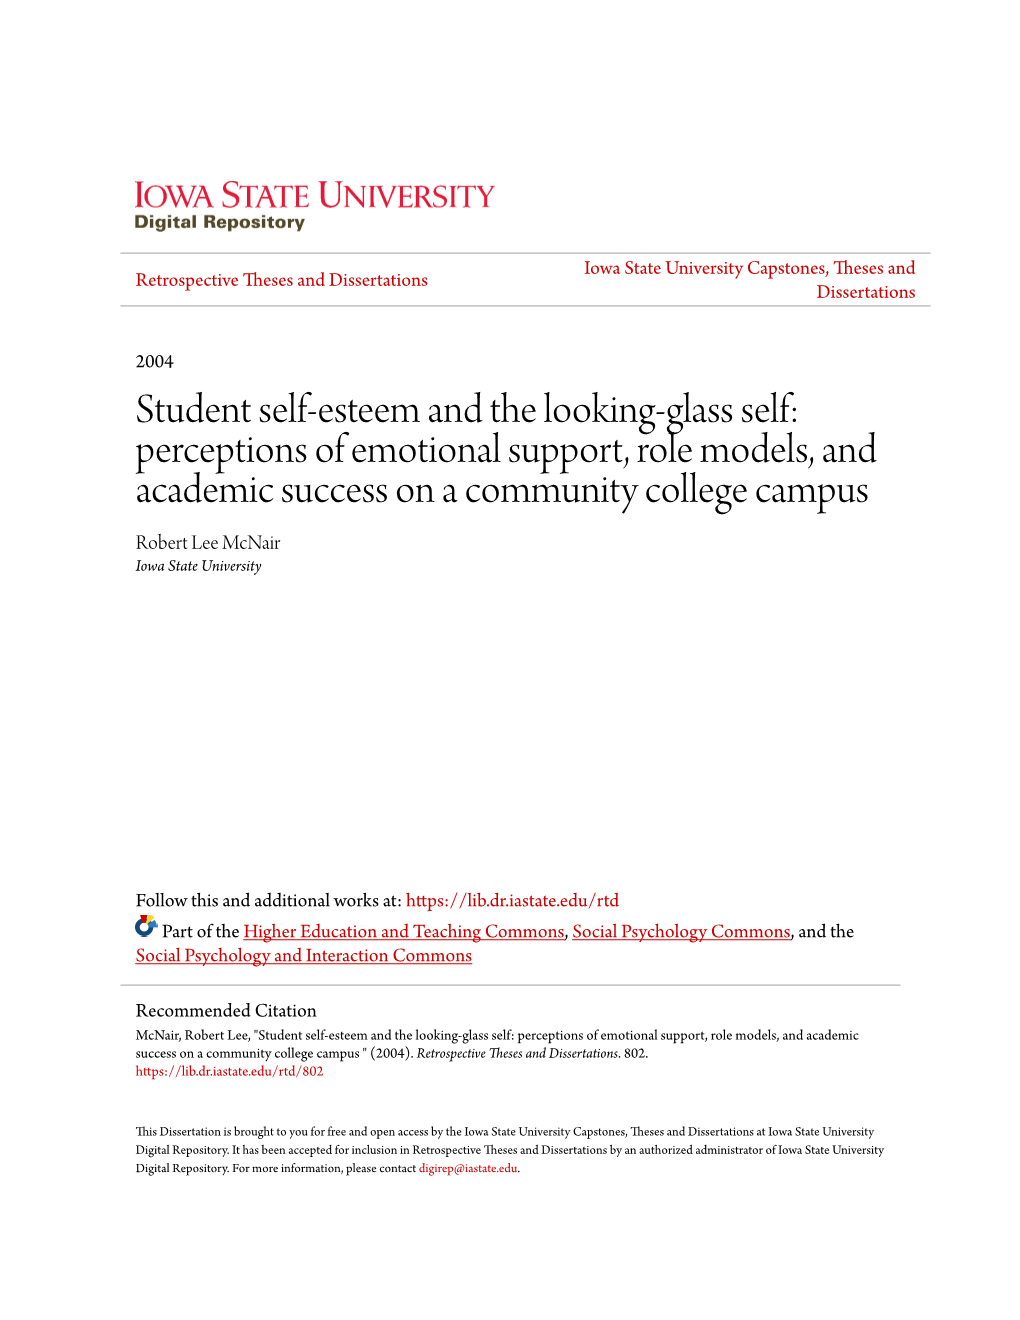 Student Self-Esteem and the Looking-Glass Self: Perceptions Of